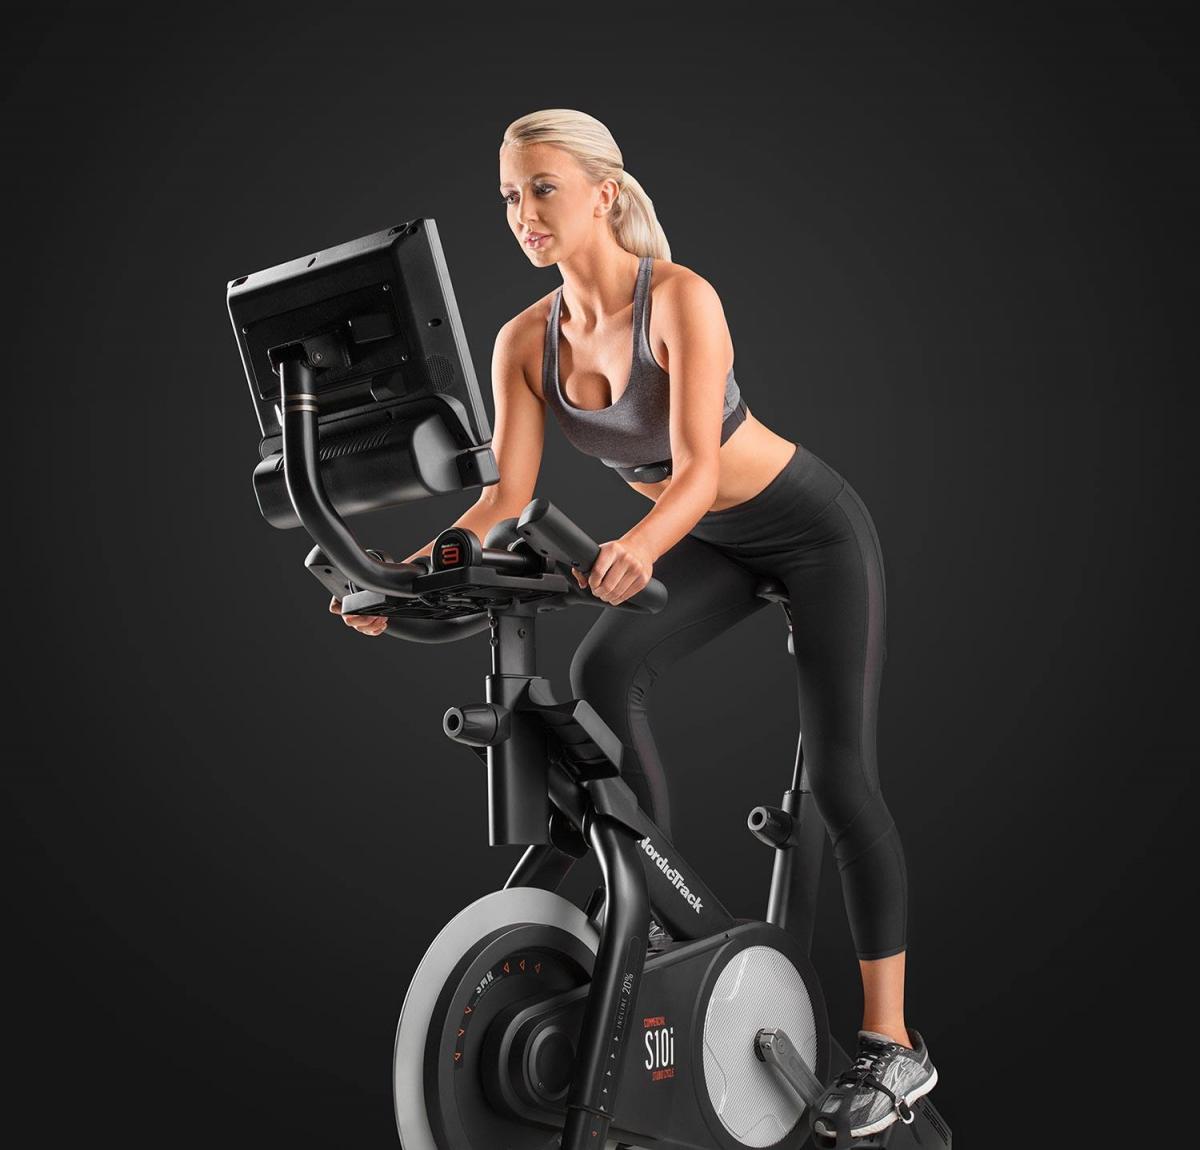 exercise bike cycling workout muscle activation health leg workout muscle activation heart health